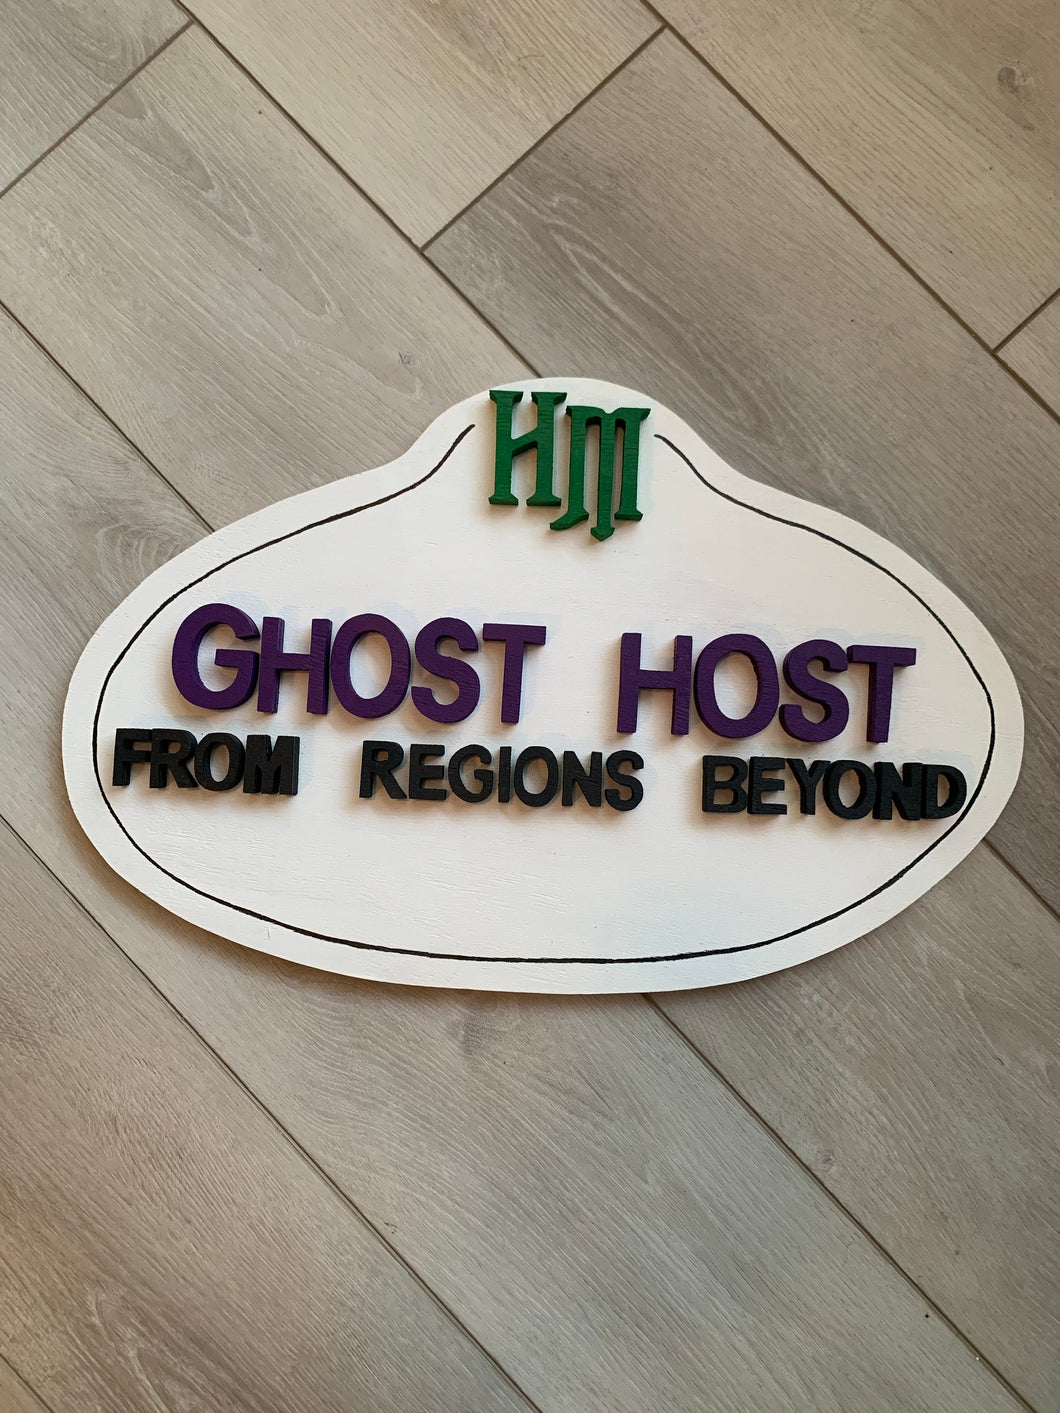 Disney Haunted Mansion Ghost Host Name Tag Sign